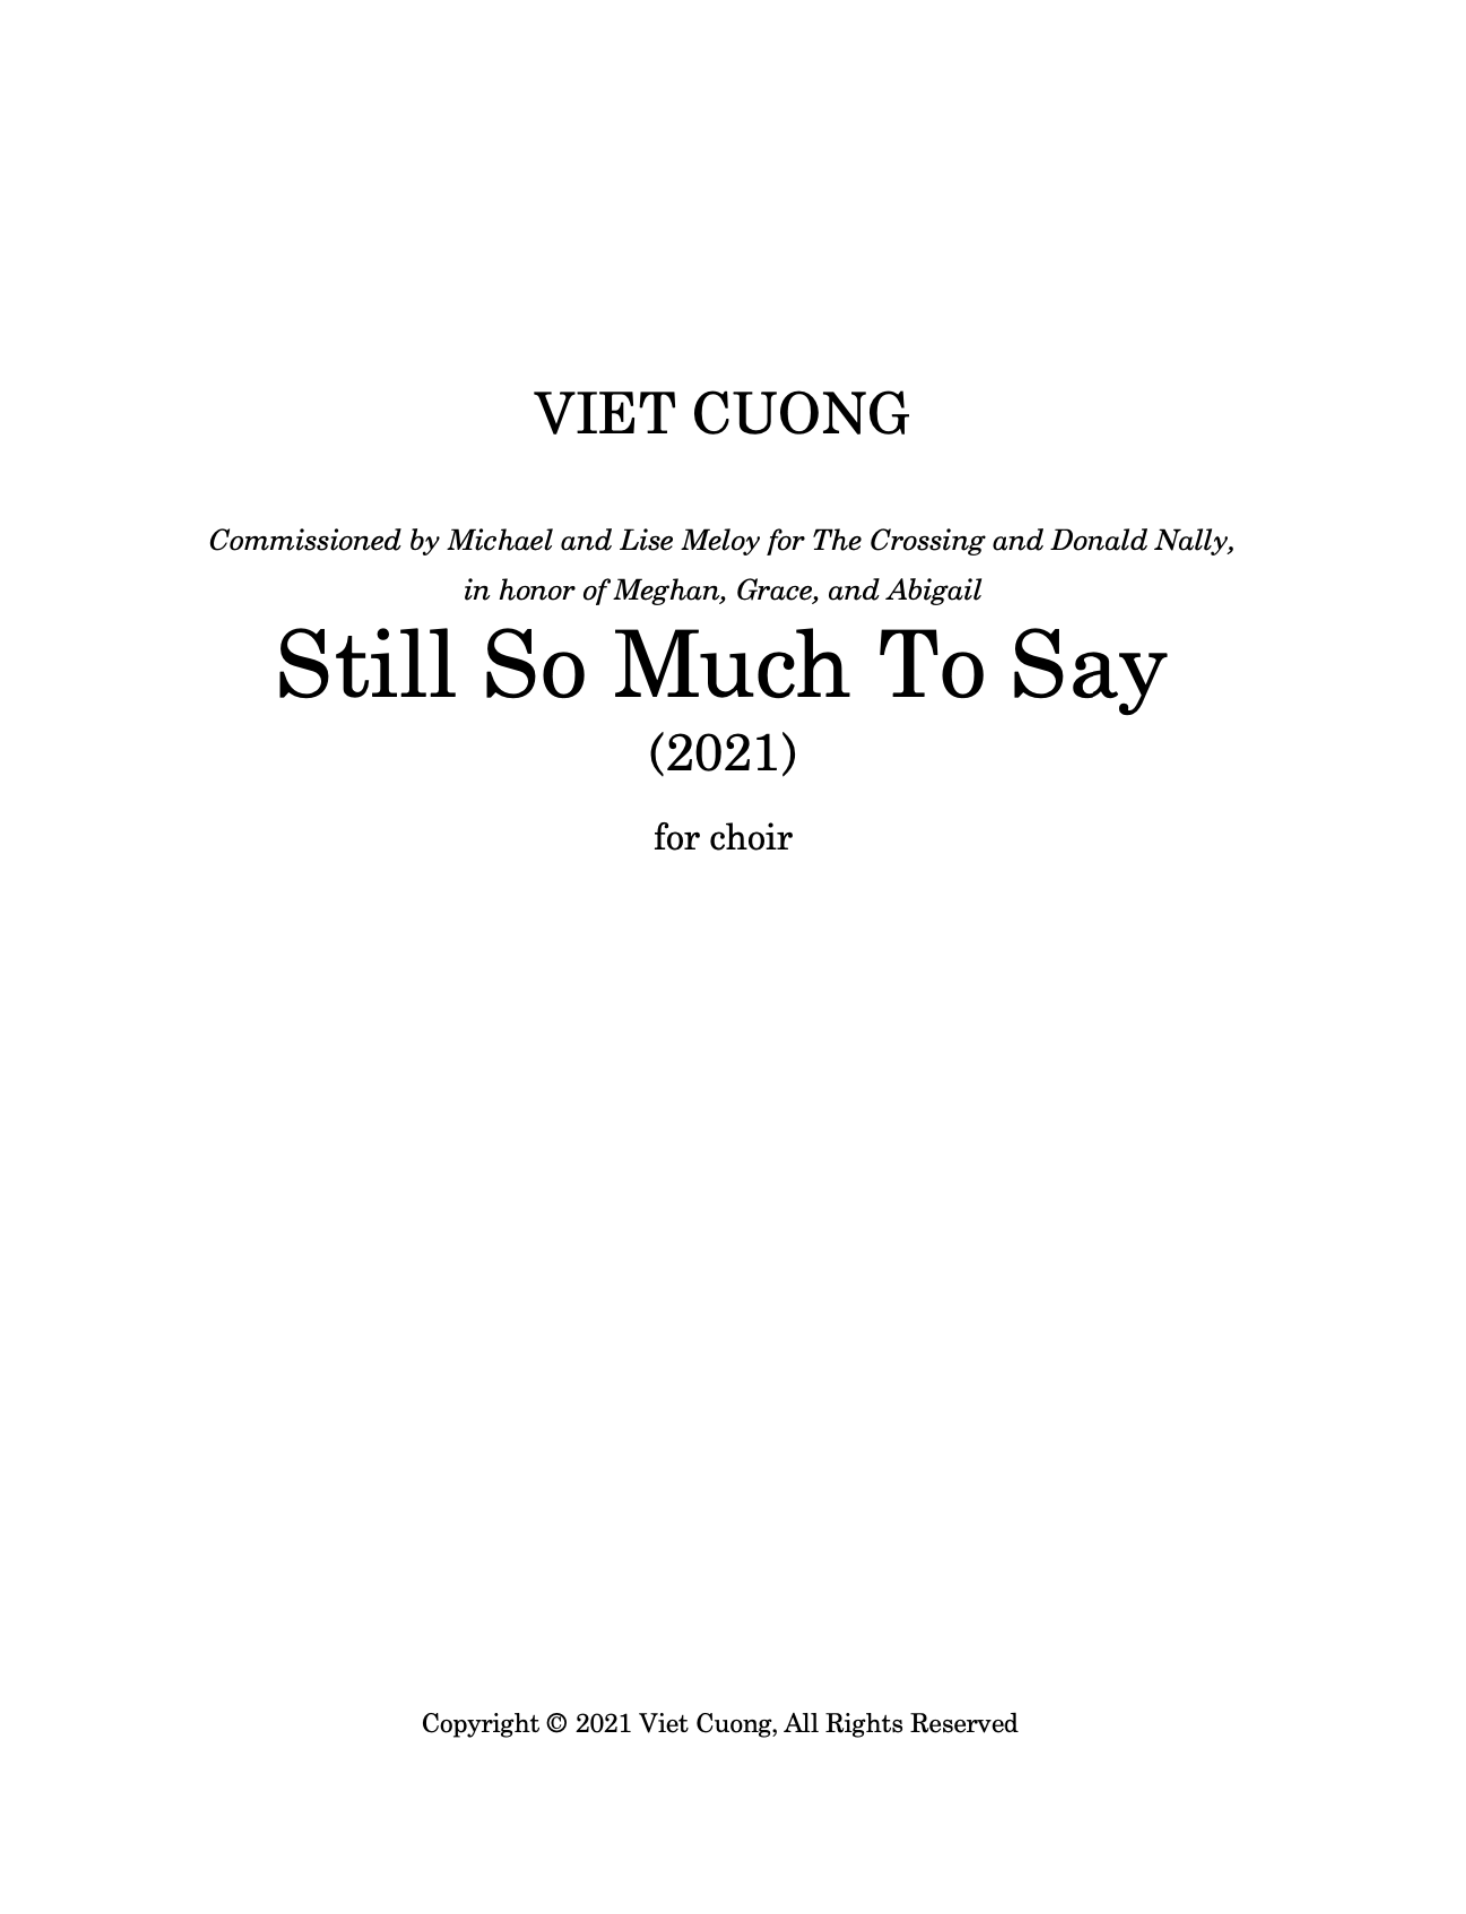 Still So Much To Say by Viet Cuong